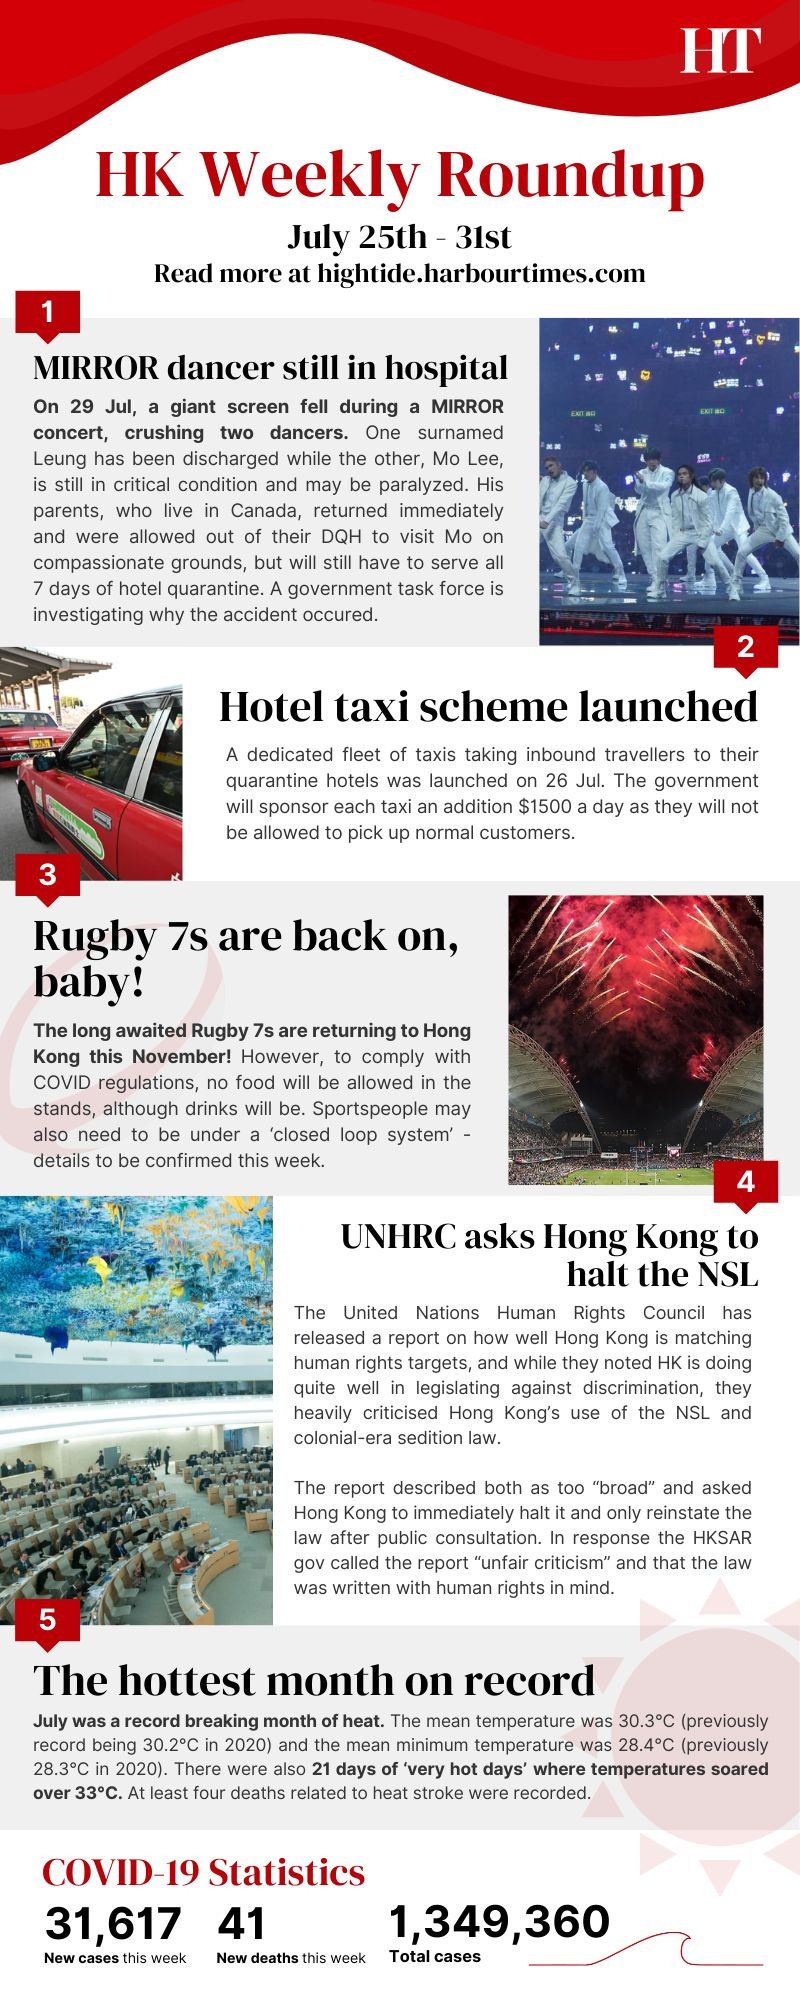 Infographic covering top 5 Hong Kong news stories from Harbour Times in July 2022.